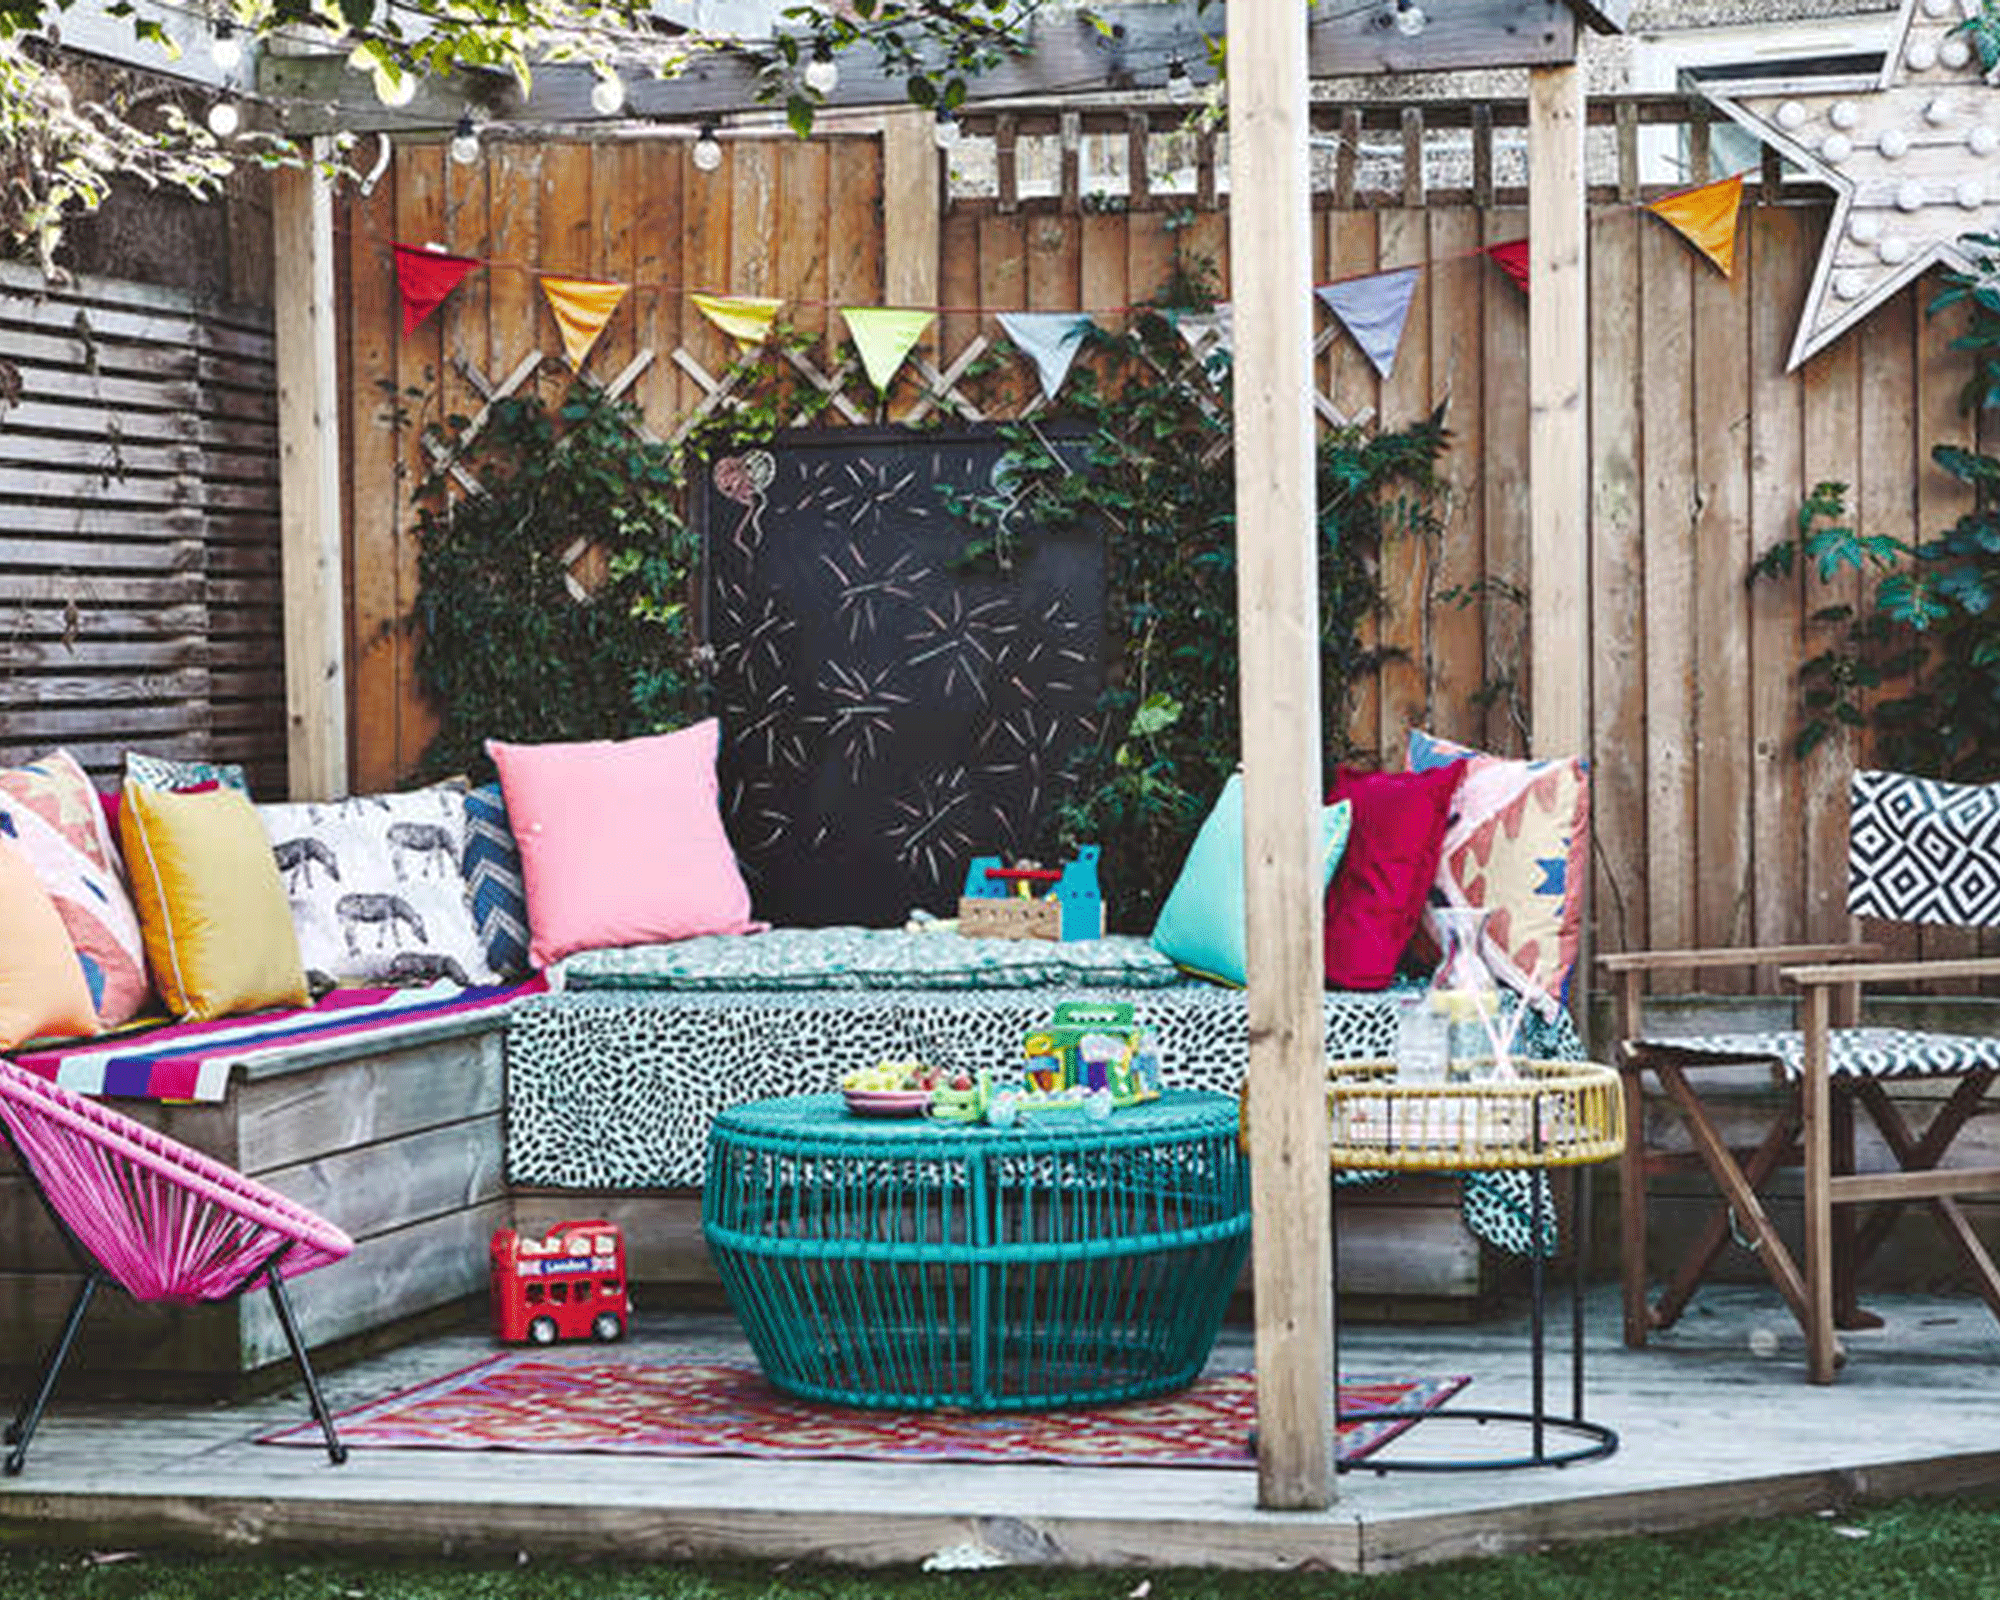 A kids activity center on a deck with chalkboard, bunting and colorful accessories